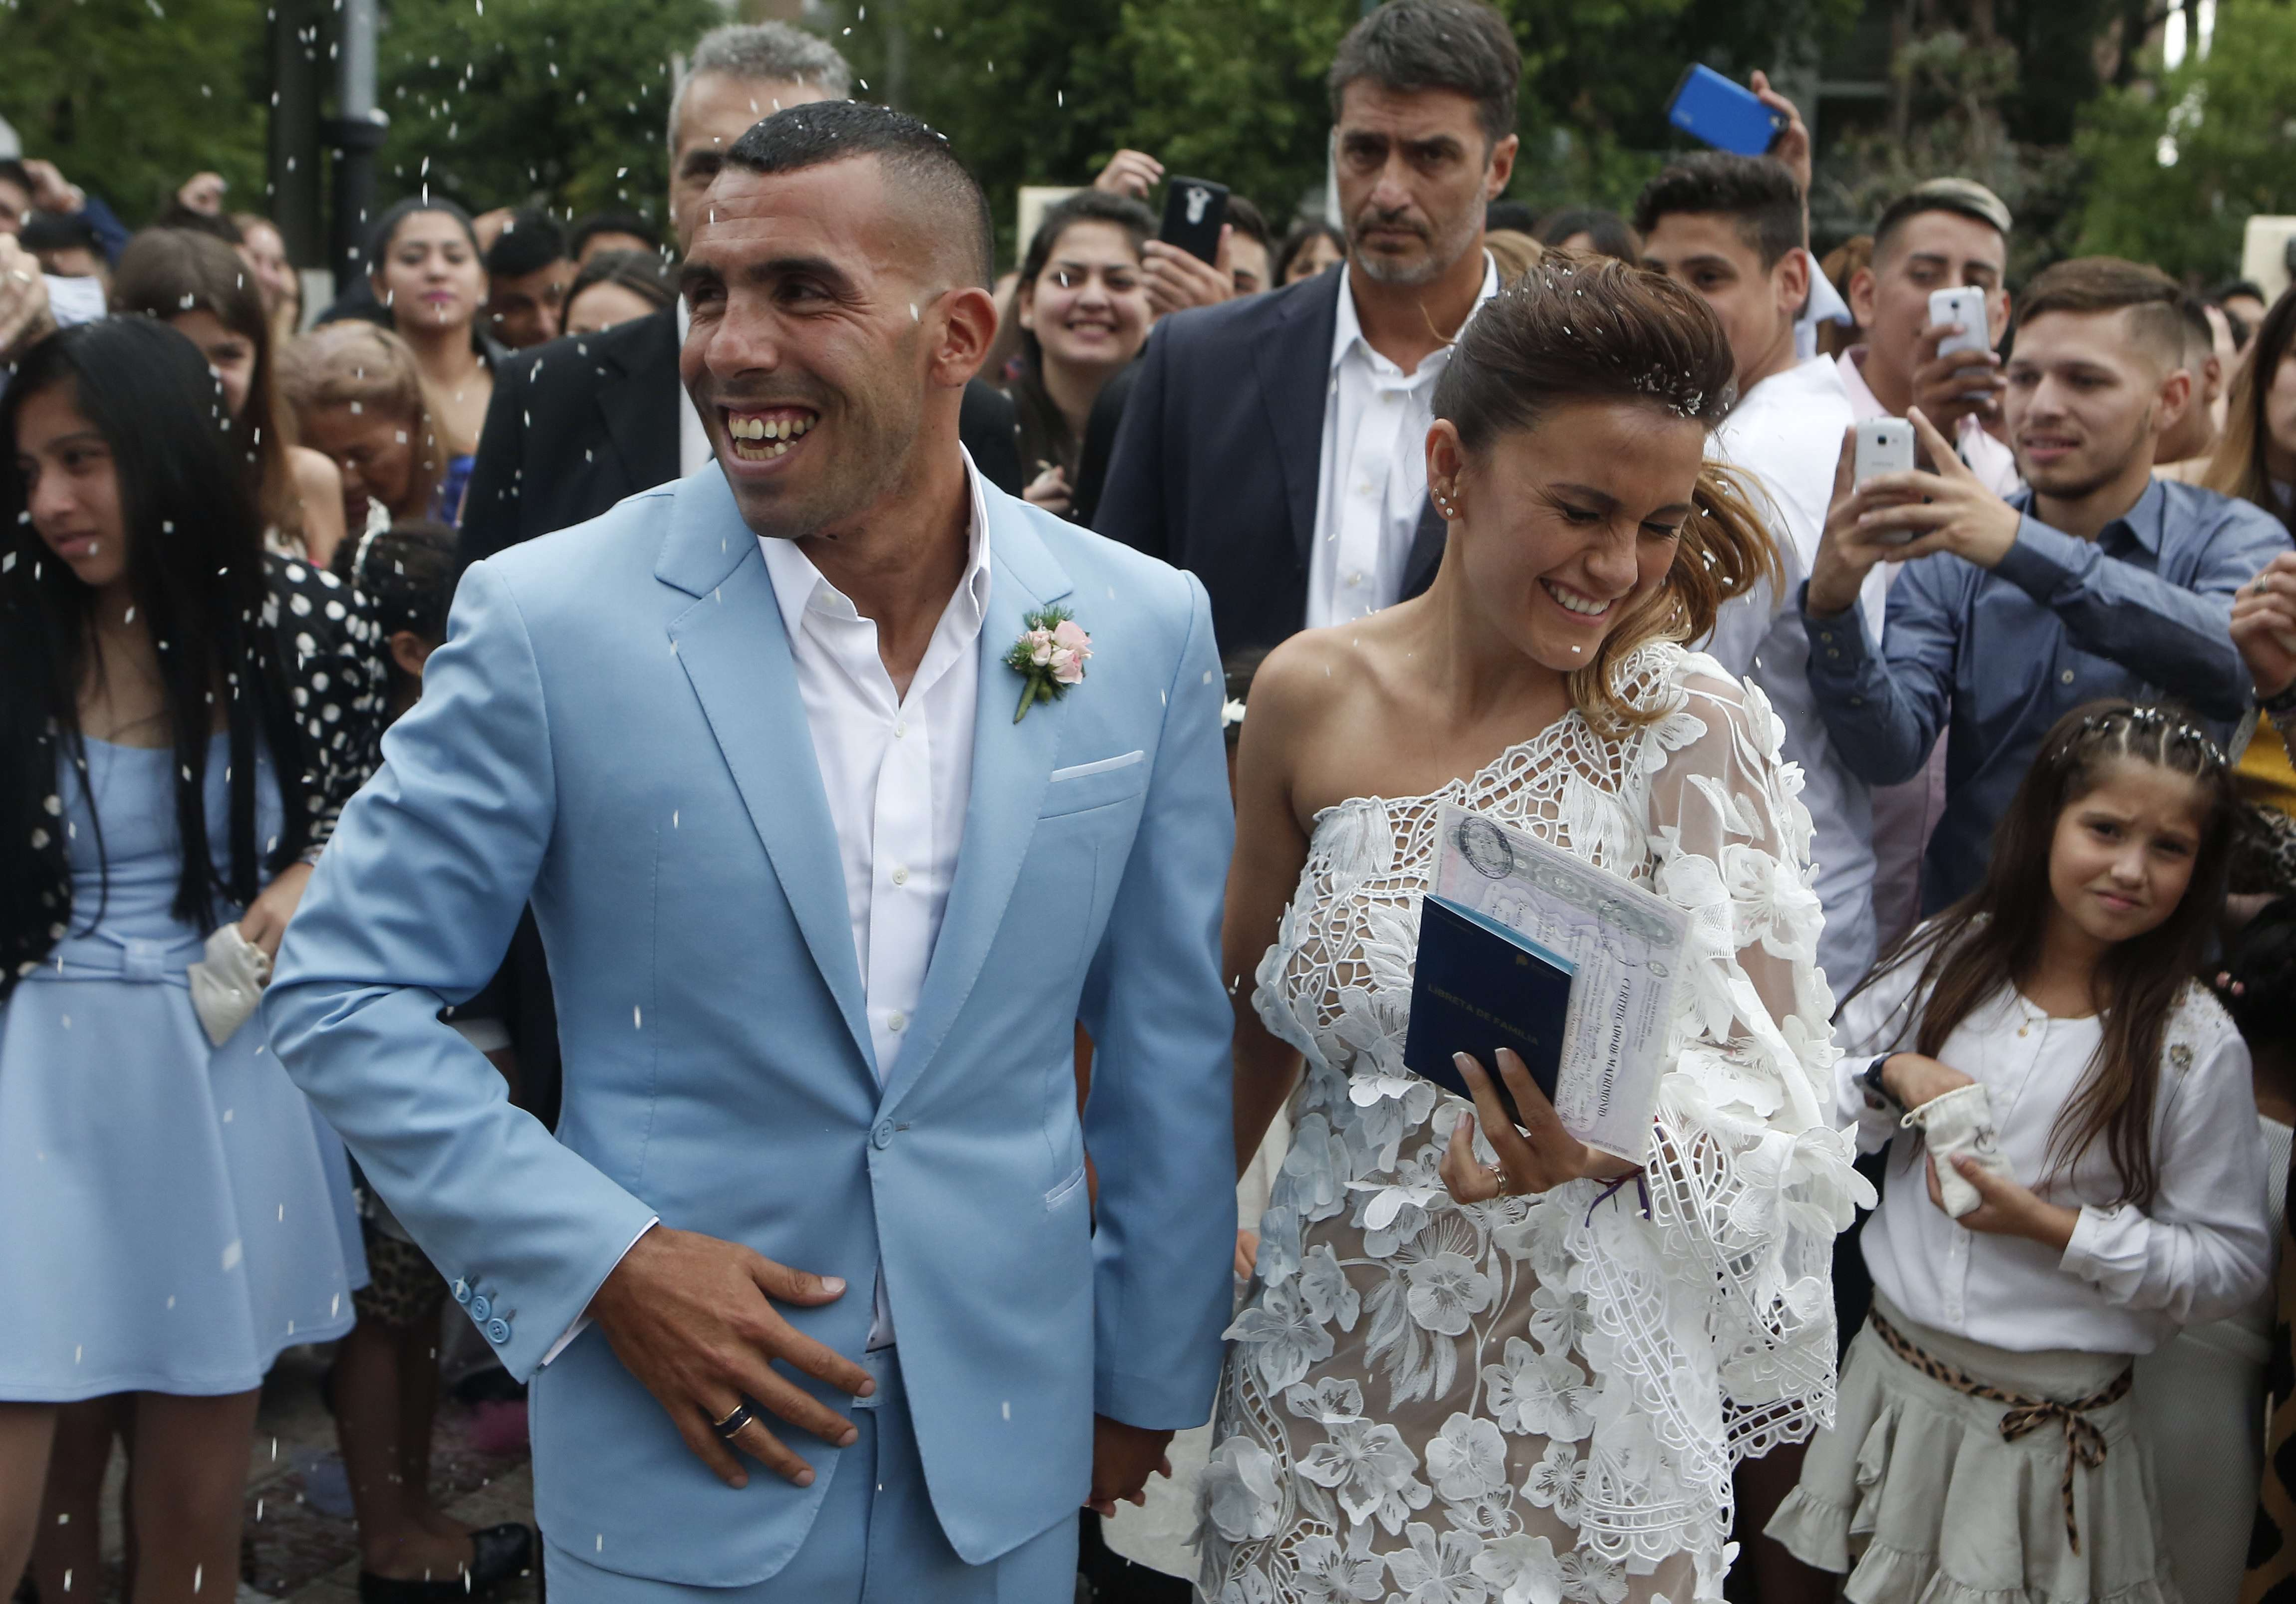 Carlos Tevez and his wife Vanesa Mansilla exit the church after their wedding in Buenos Aires. Photo: AP